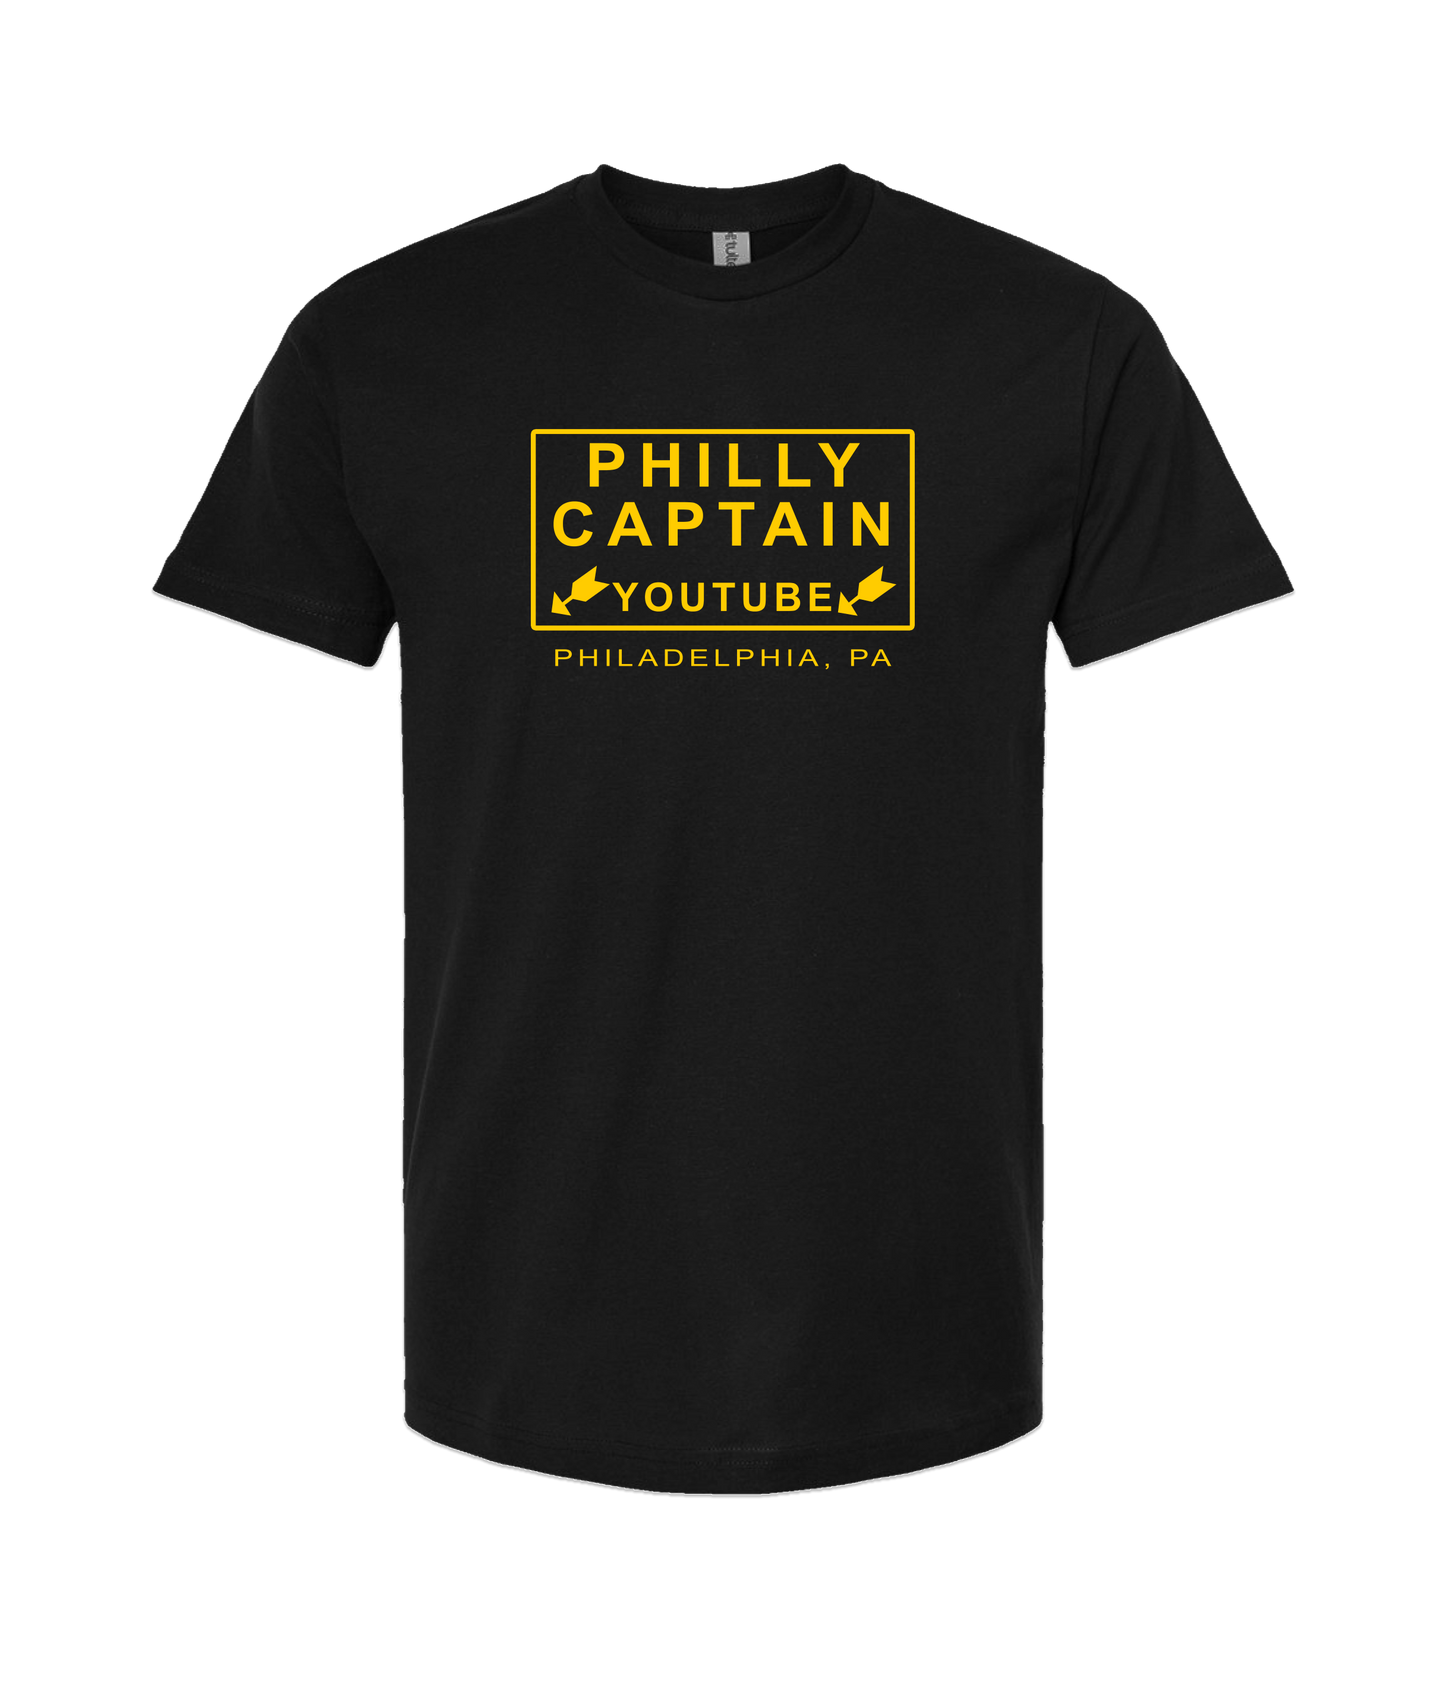 The Philly Captain's Merch is Fire - YouTube - Black T-Shirt